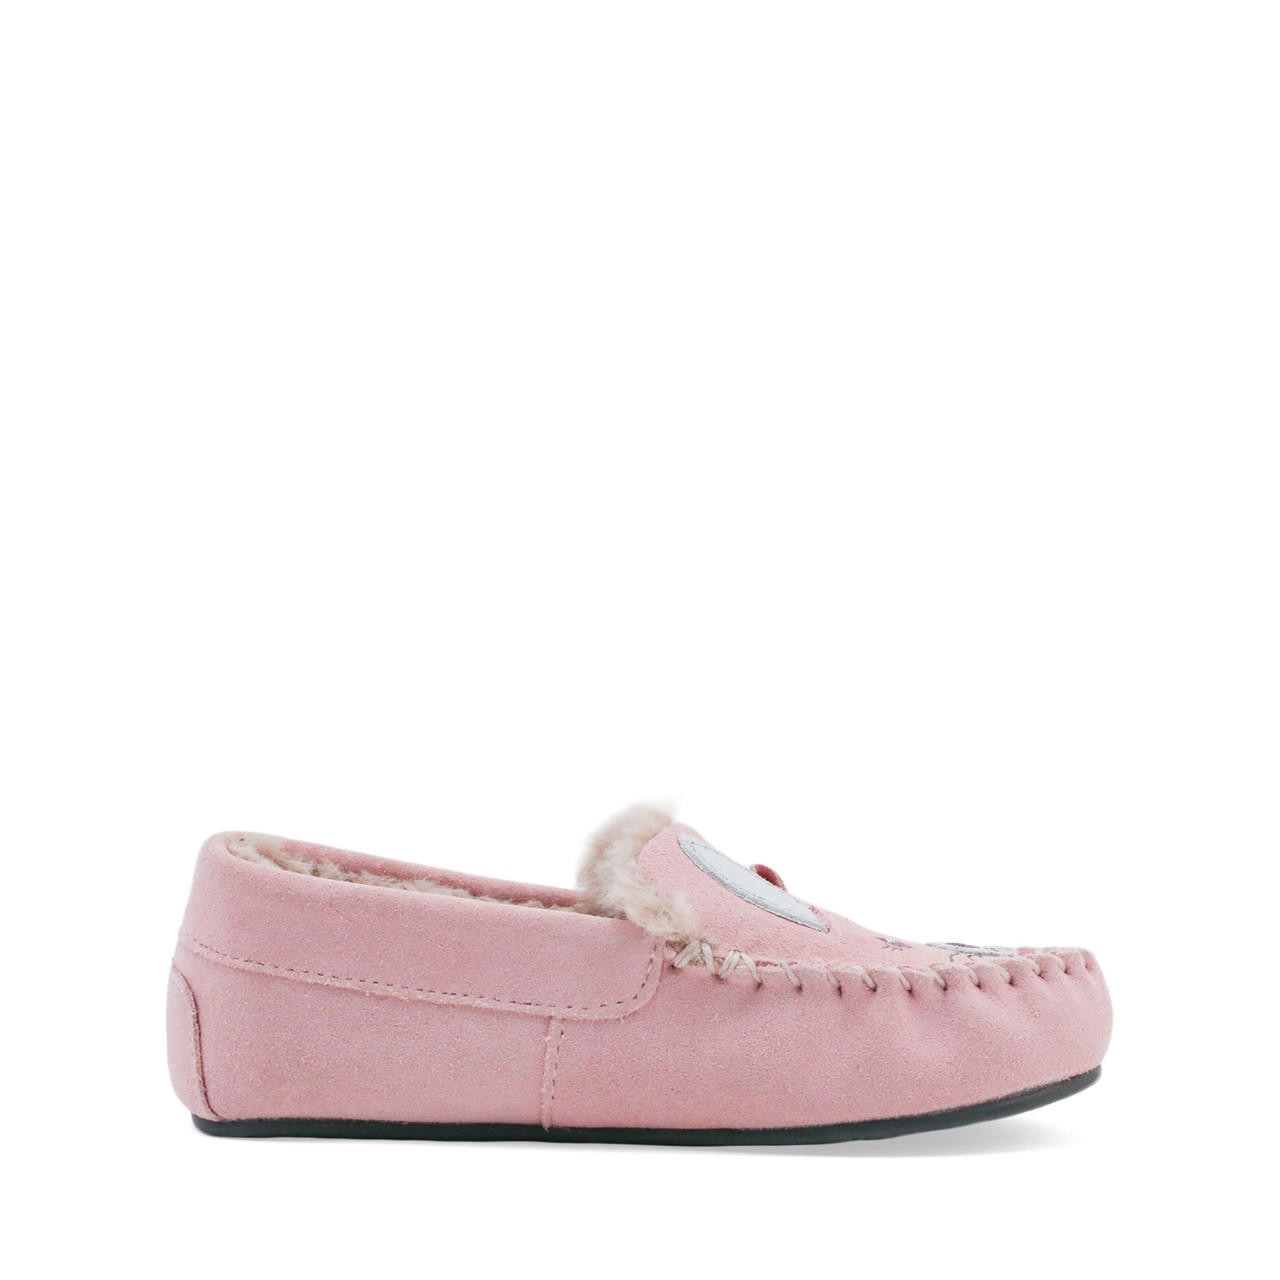 Snuggle, Pink suede bunny slip-on slippers - Start-Rite